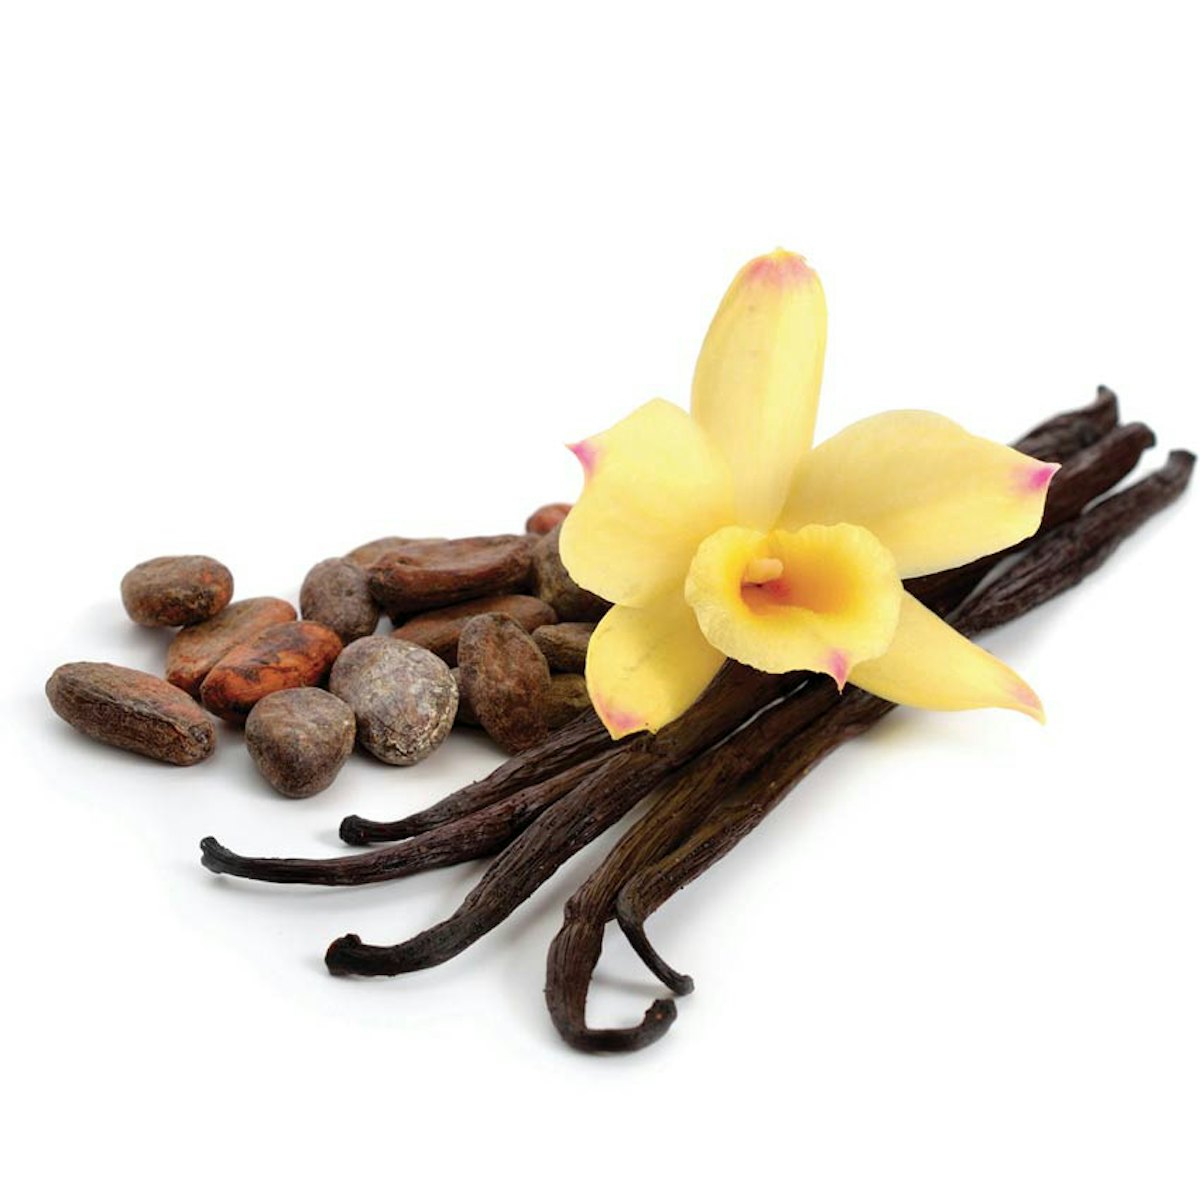 Extracting the Essence: Comparing Vanilla and Cocoa Processes